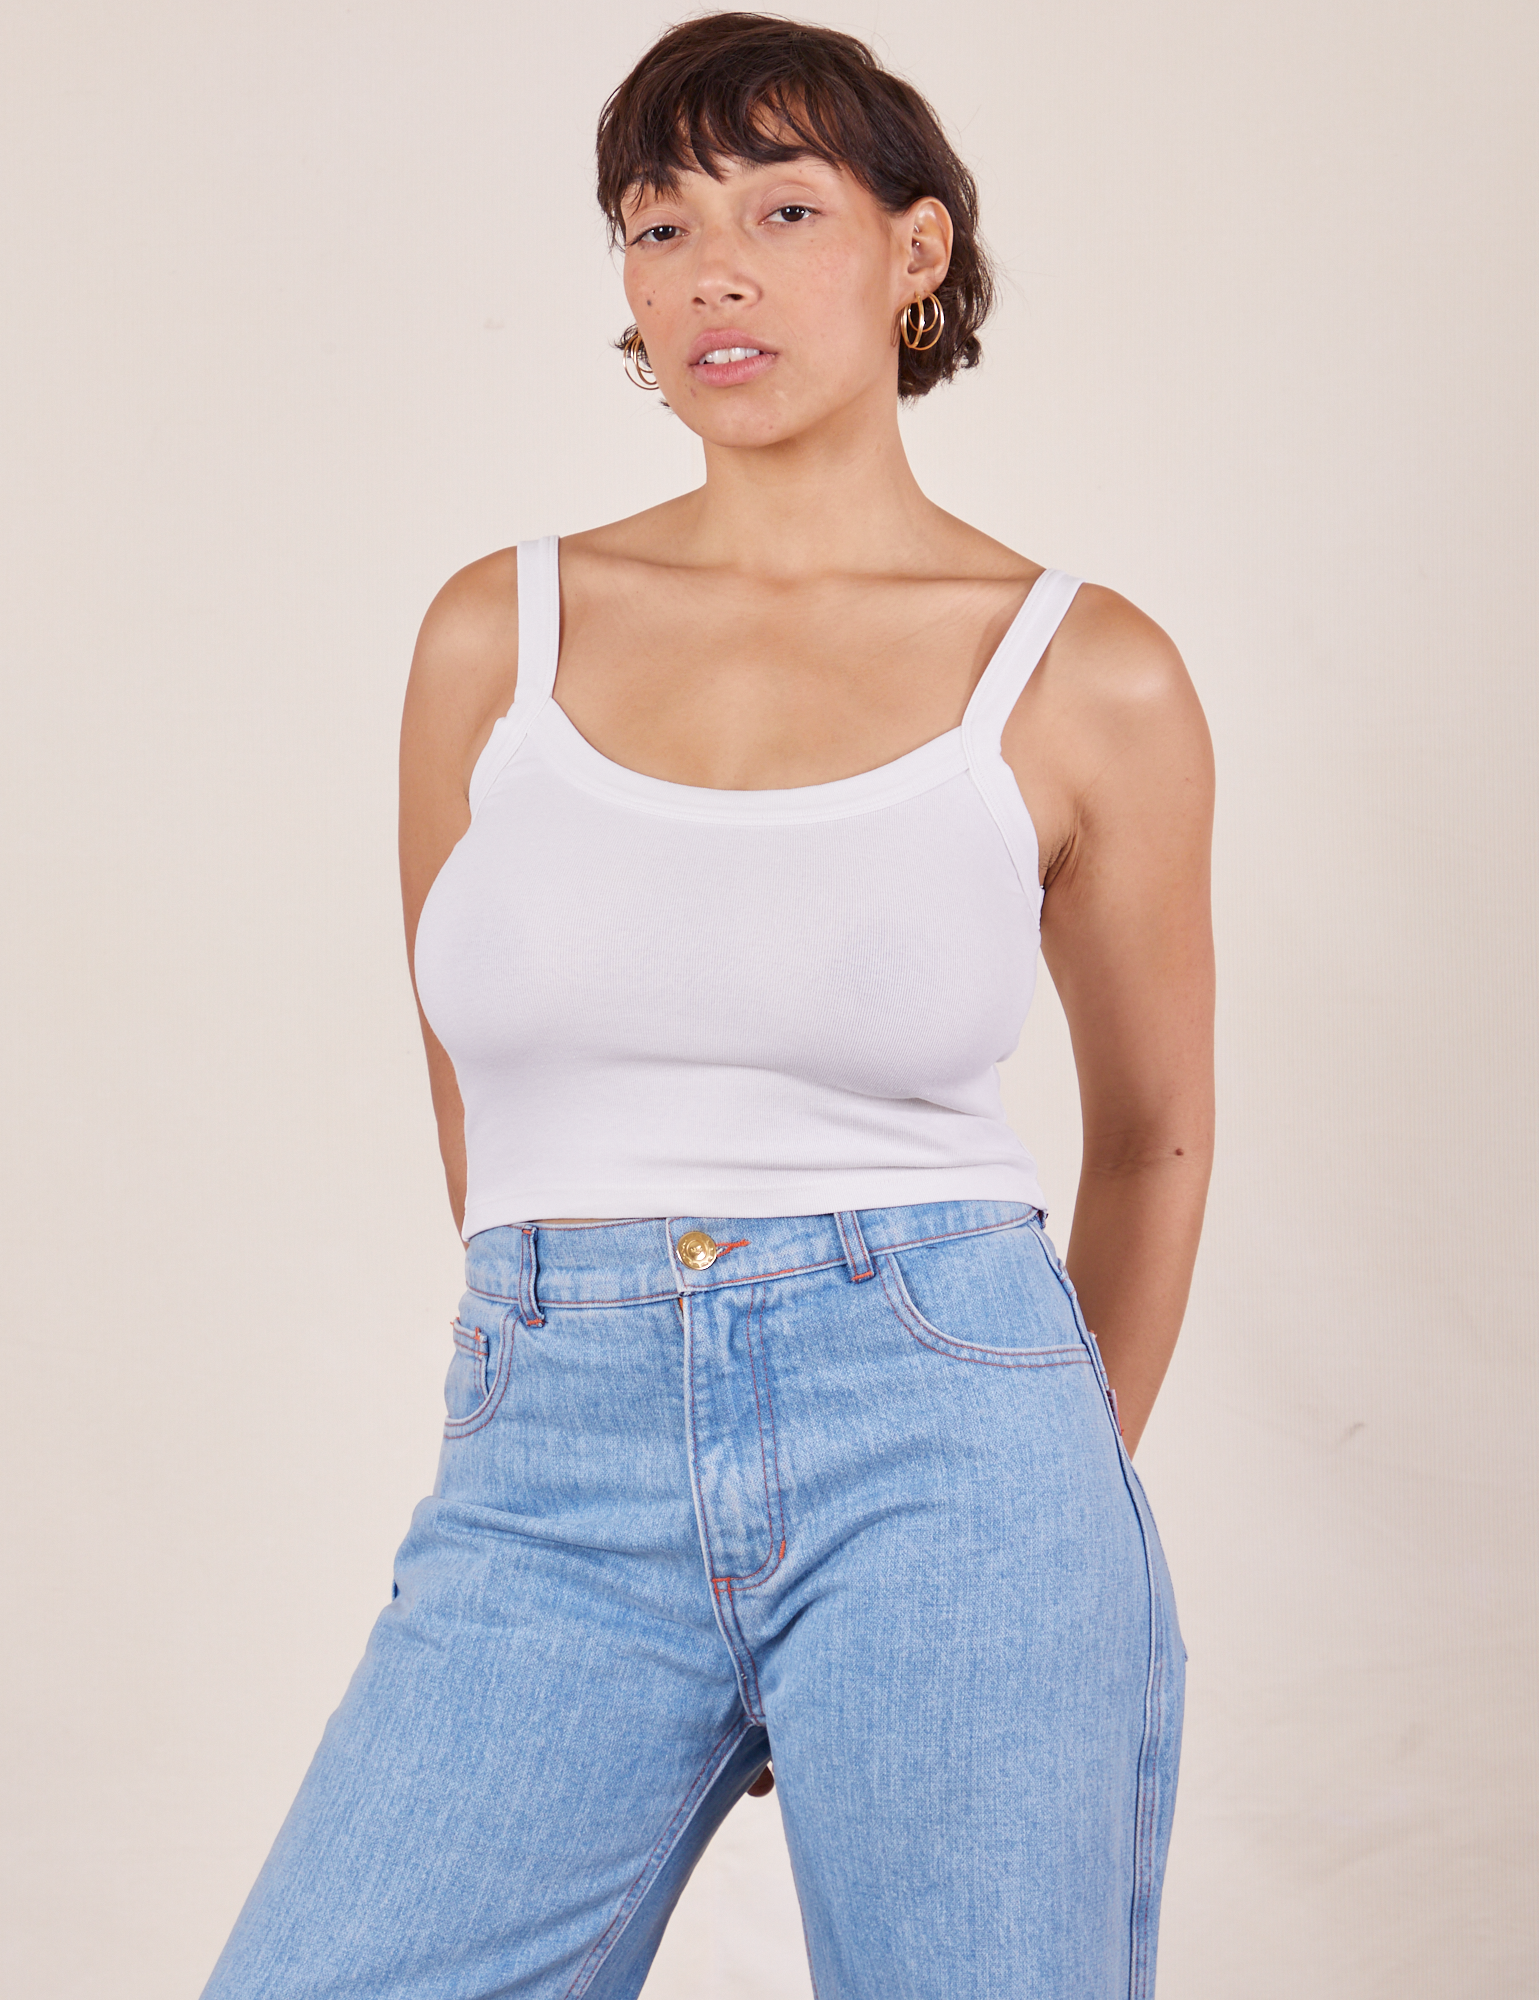 Tiara is wearing Cropped Cami in Vintage Tee Off-White and light wash Sailor Jeans